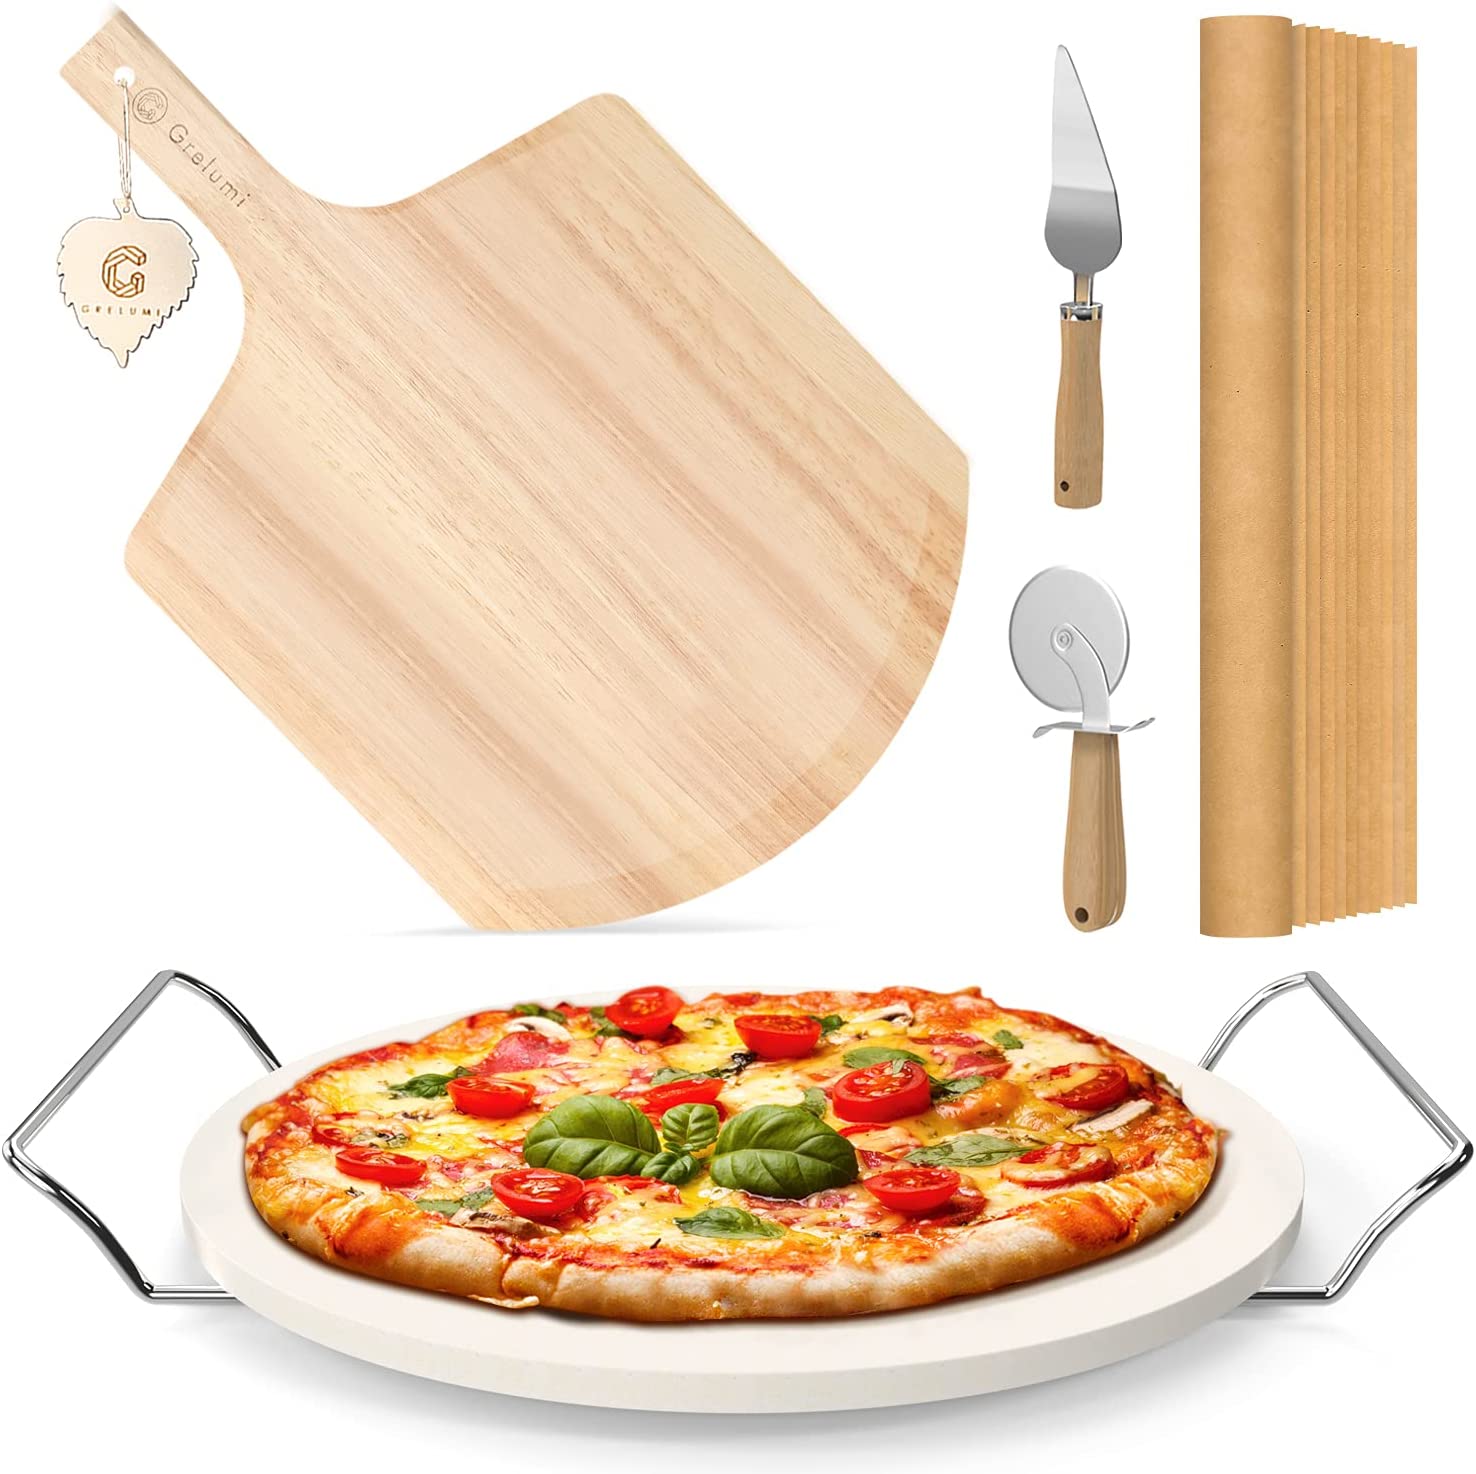 Why is a pizza peel called that